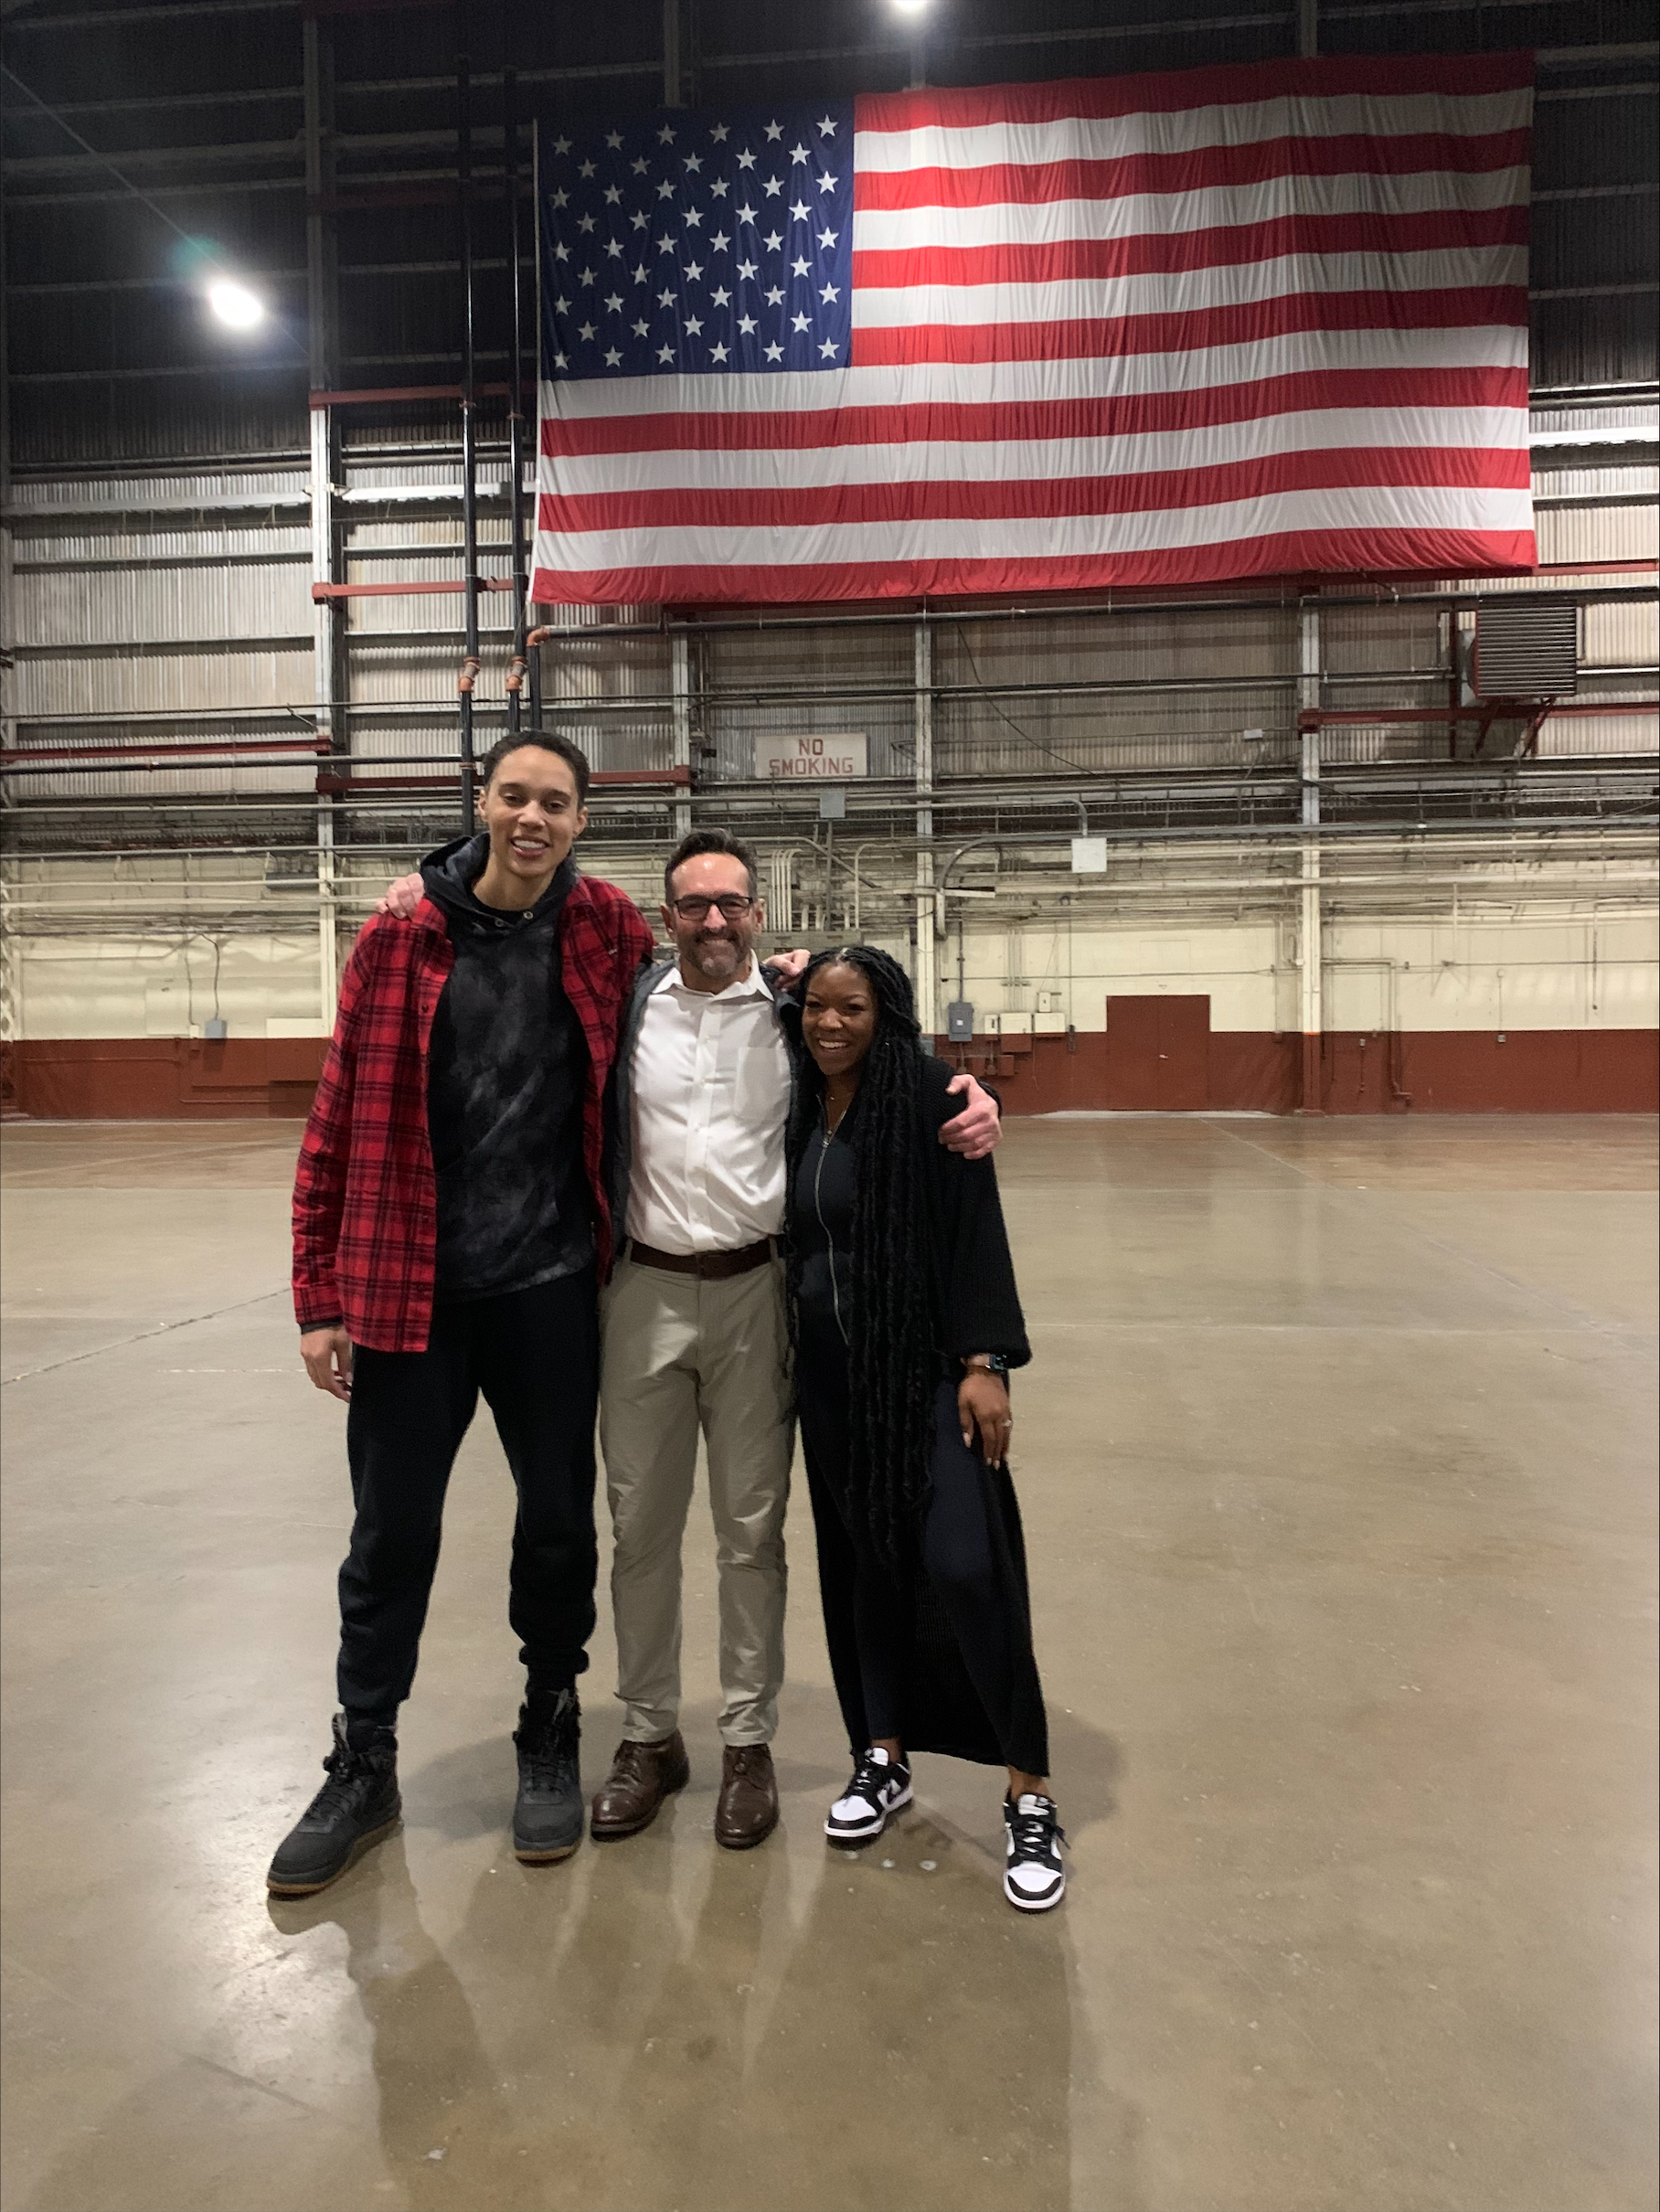 PHOTO: Basketball player Brittney Griner stands with U.S. Special Presidential Envoy for Hostage Affairs Roger Carstens and her wife Cherelle after arriving in the U.S. following her release by Russia. 